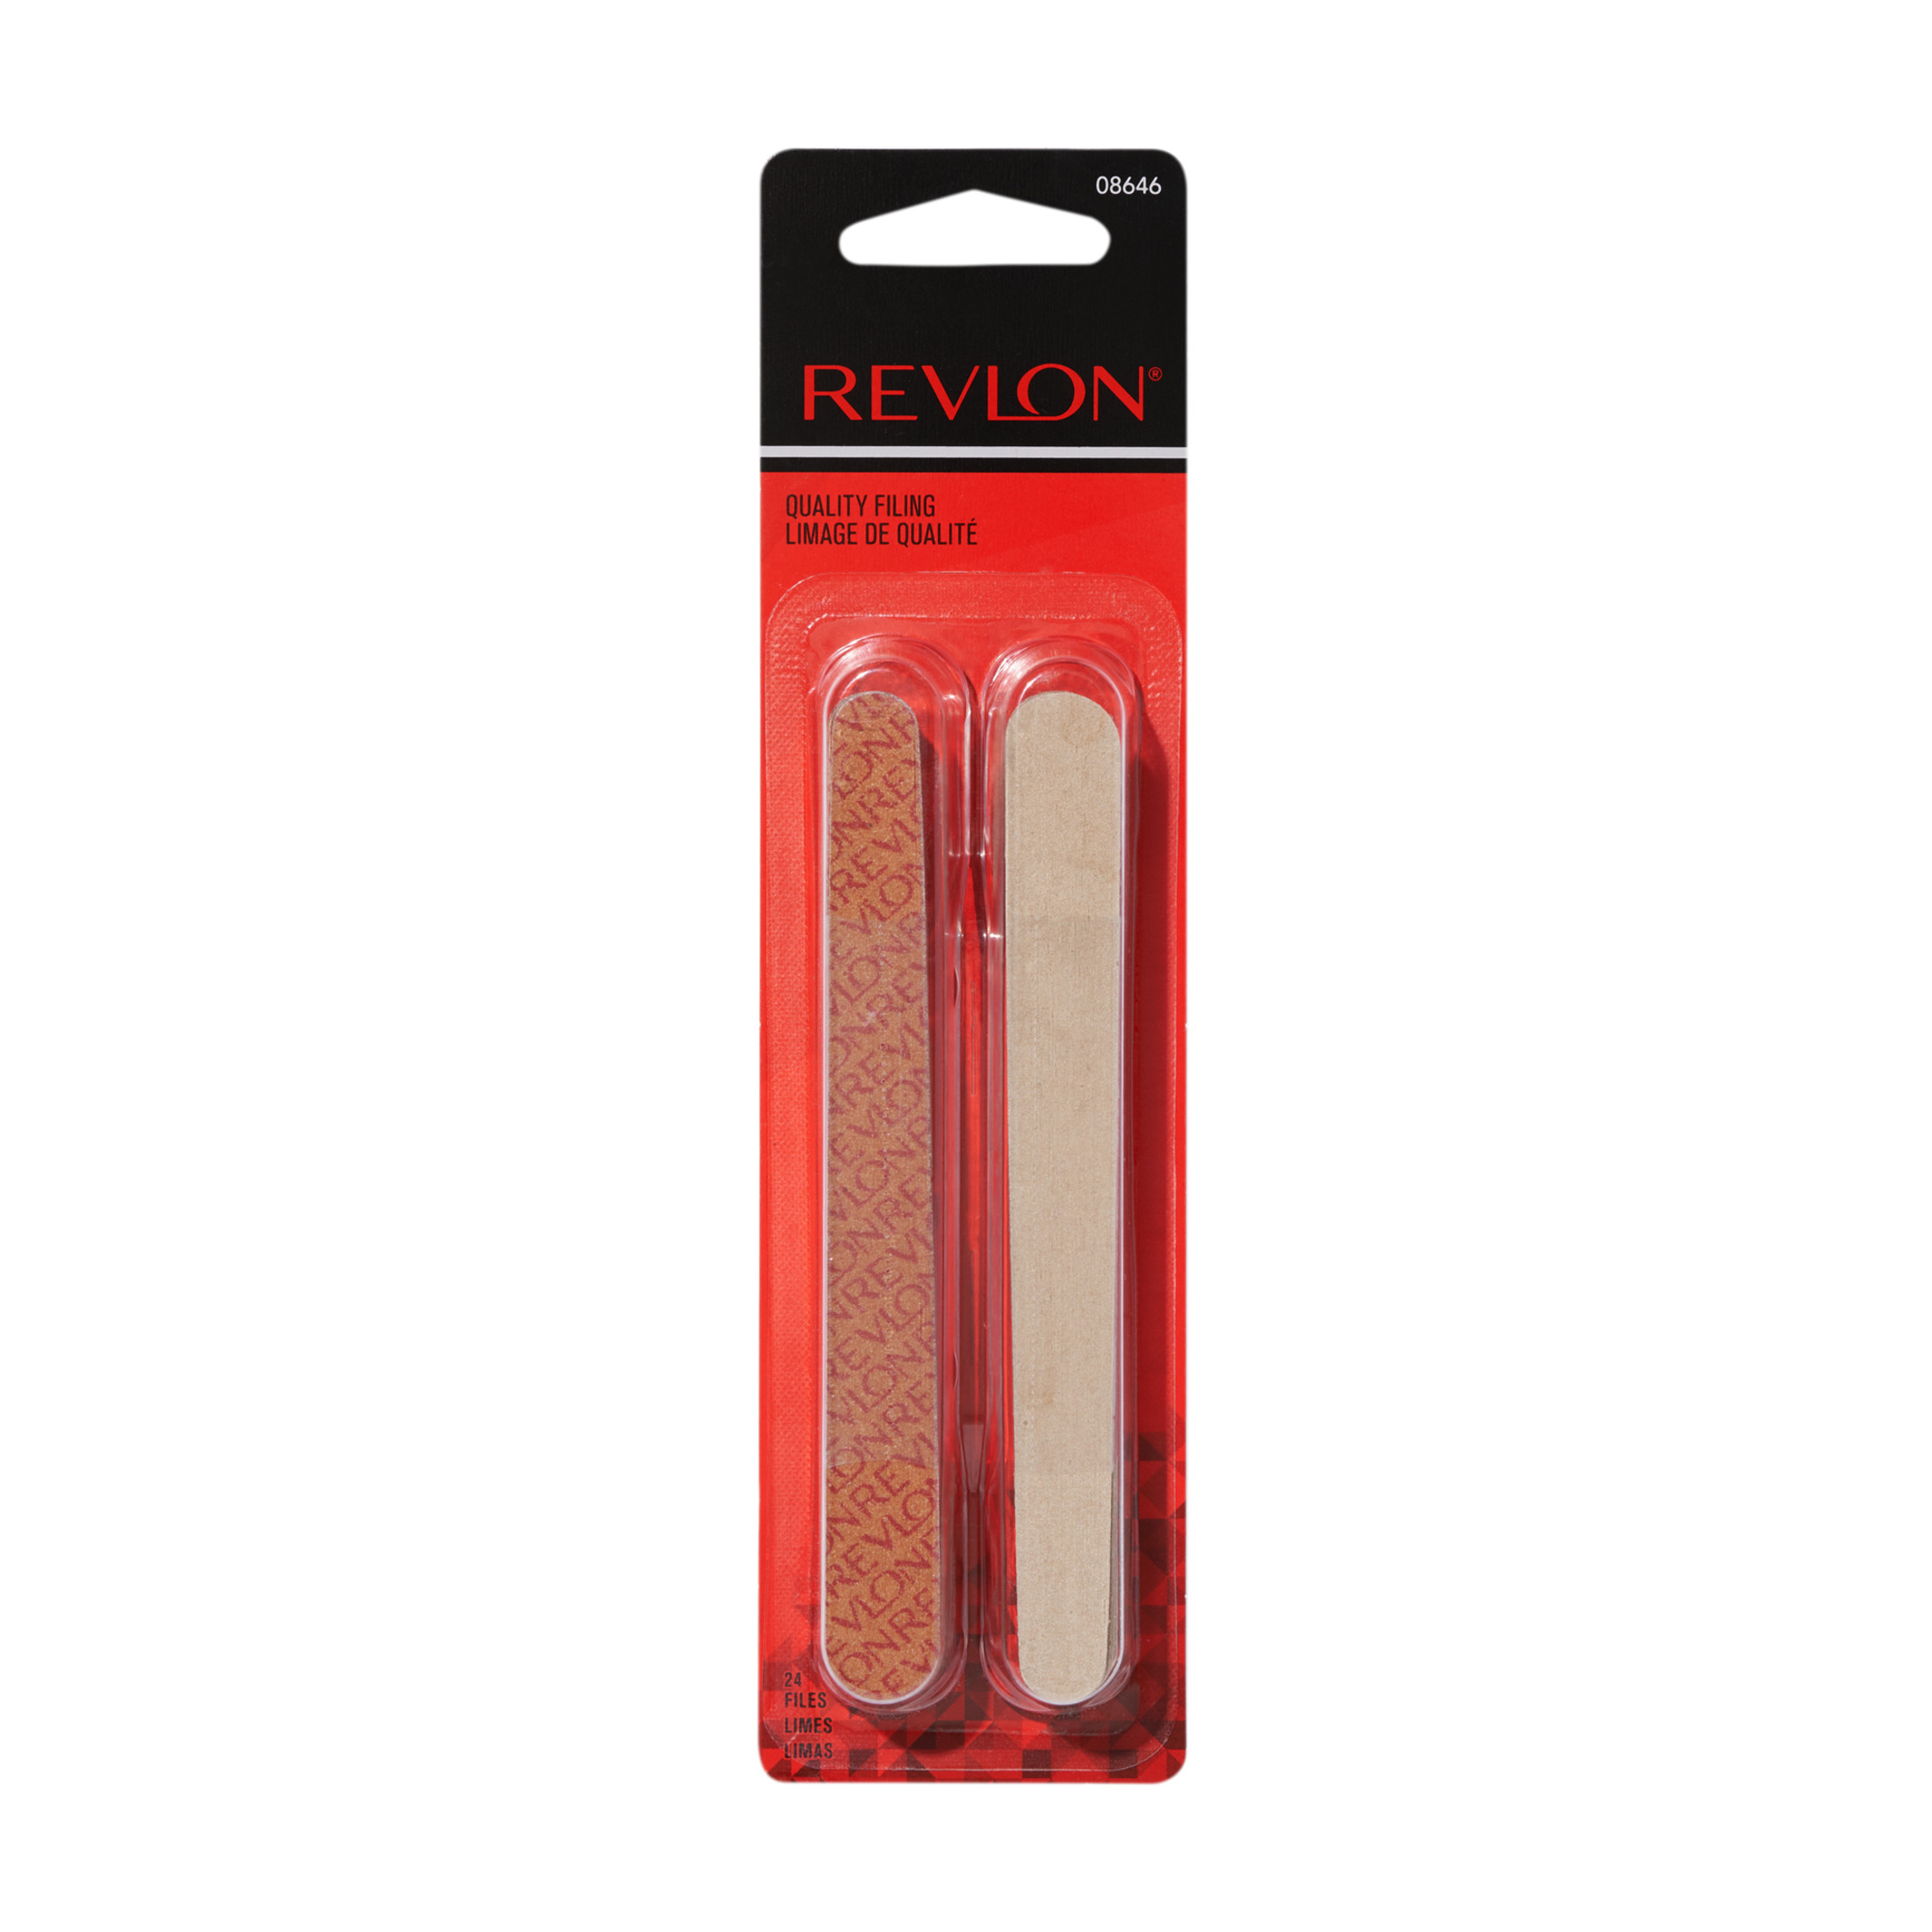 Revlon Compact Emery Boards, Dual Sided Nail File For Precise Nail Shaping And Smoothing, 24 count - image 1 of 5